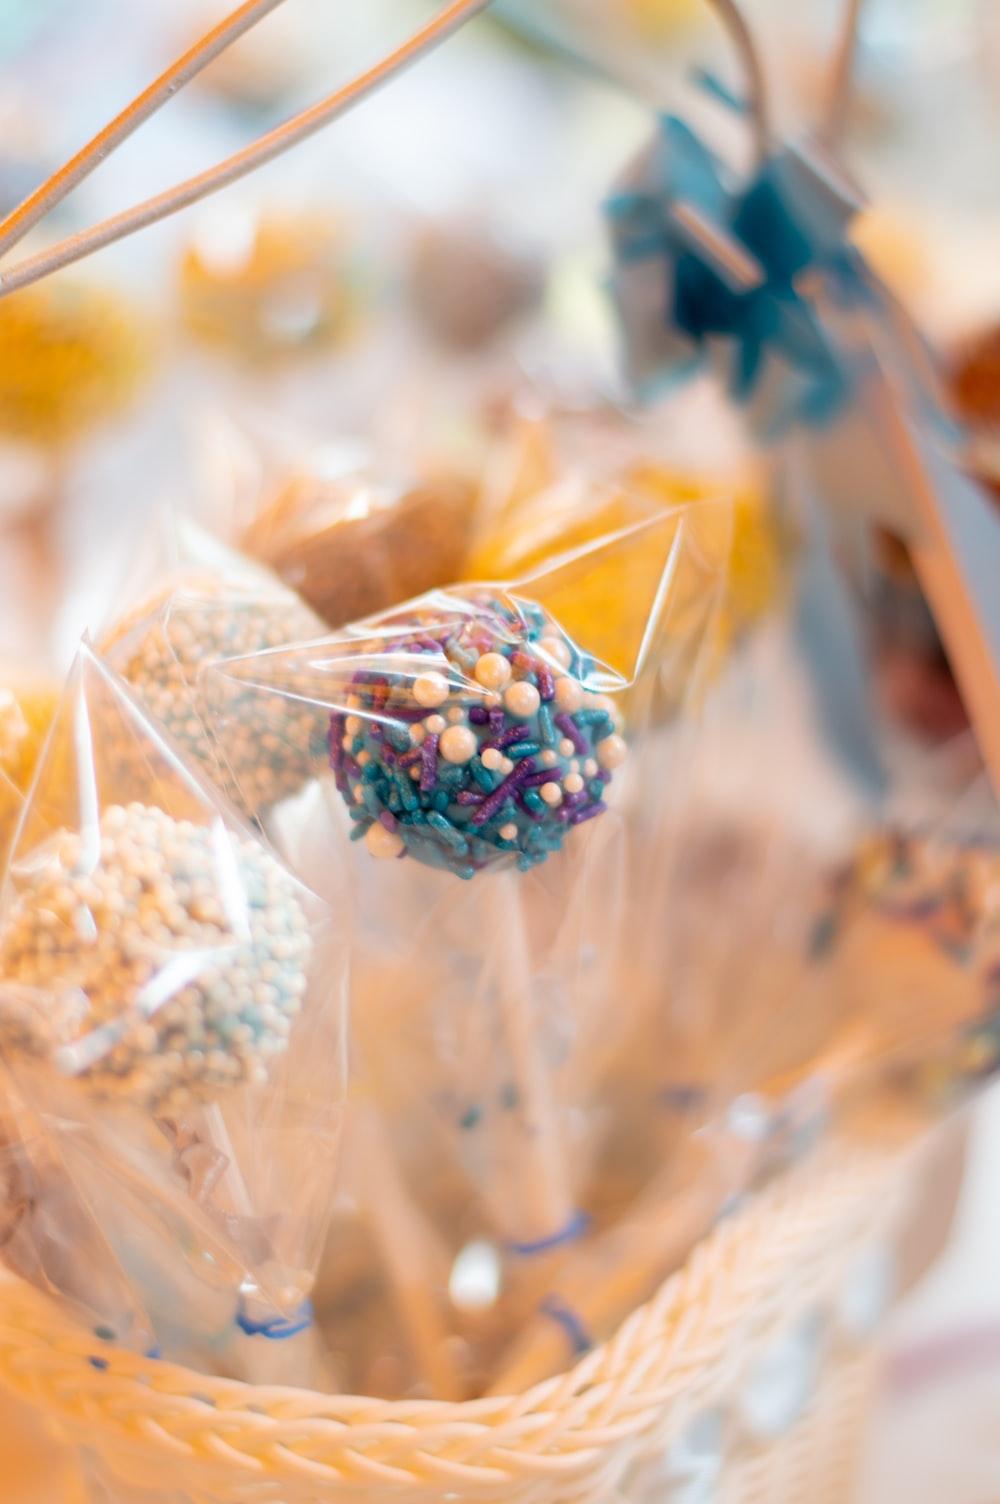 Cake Pop Picture. Download Free Image